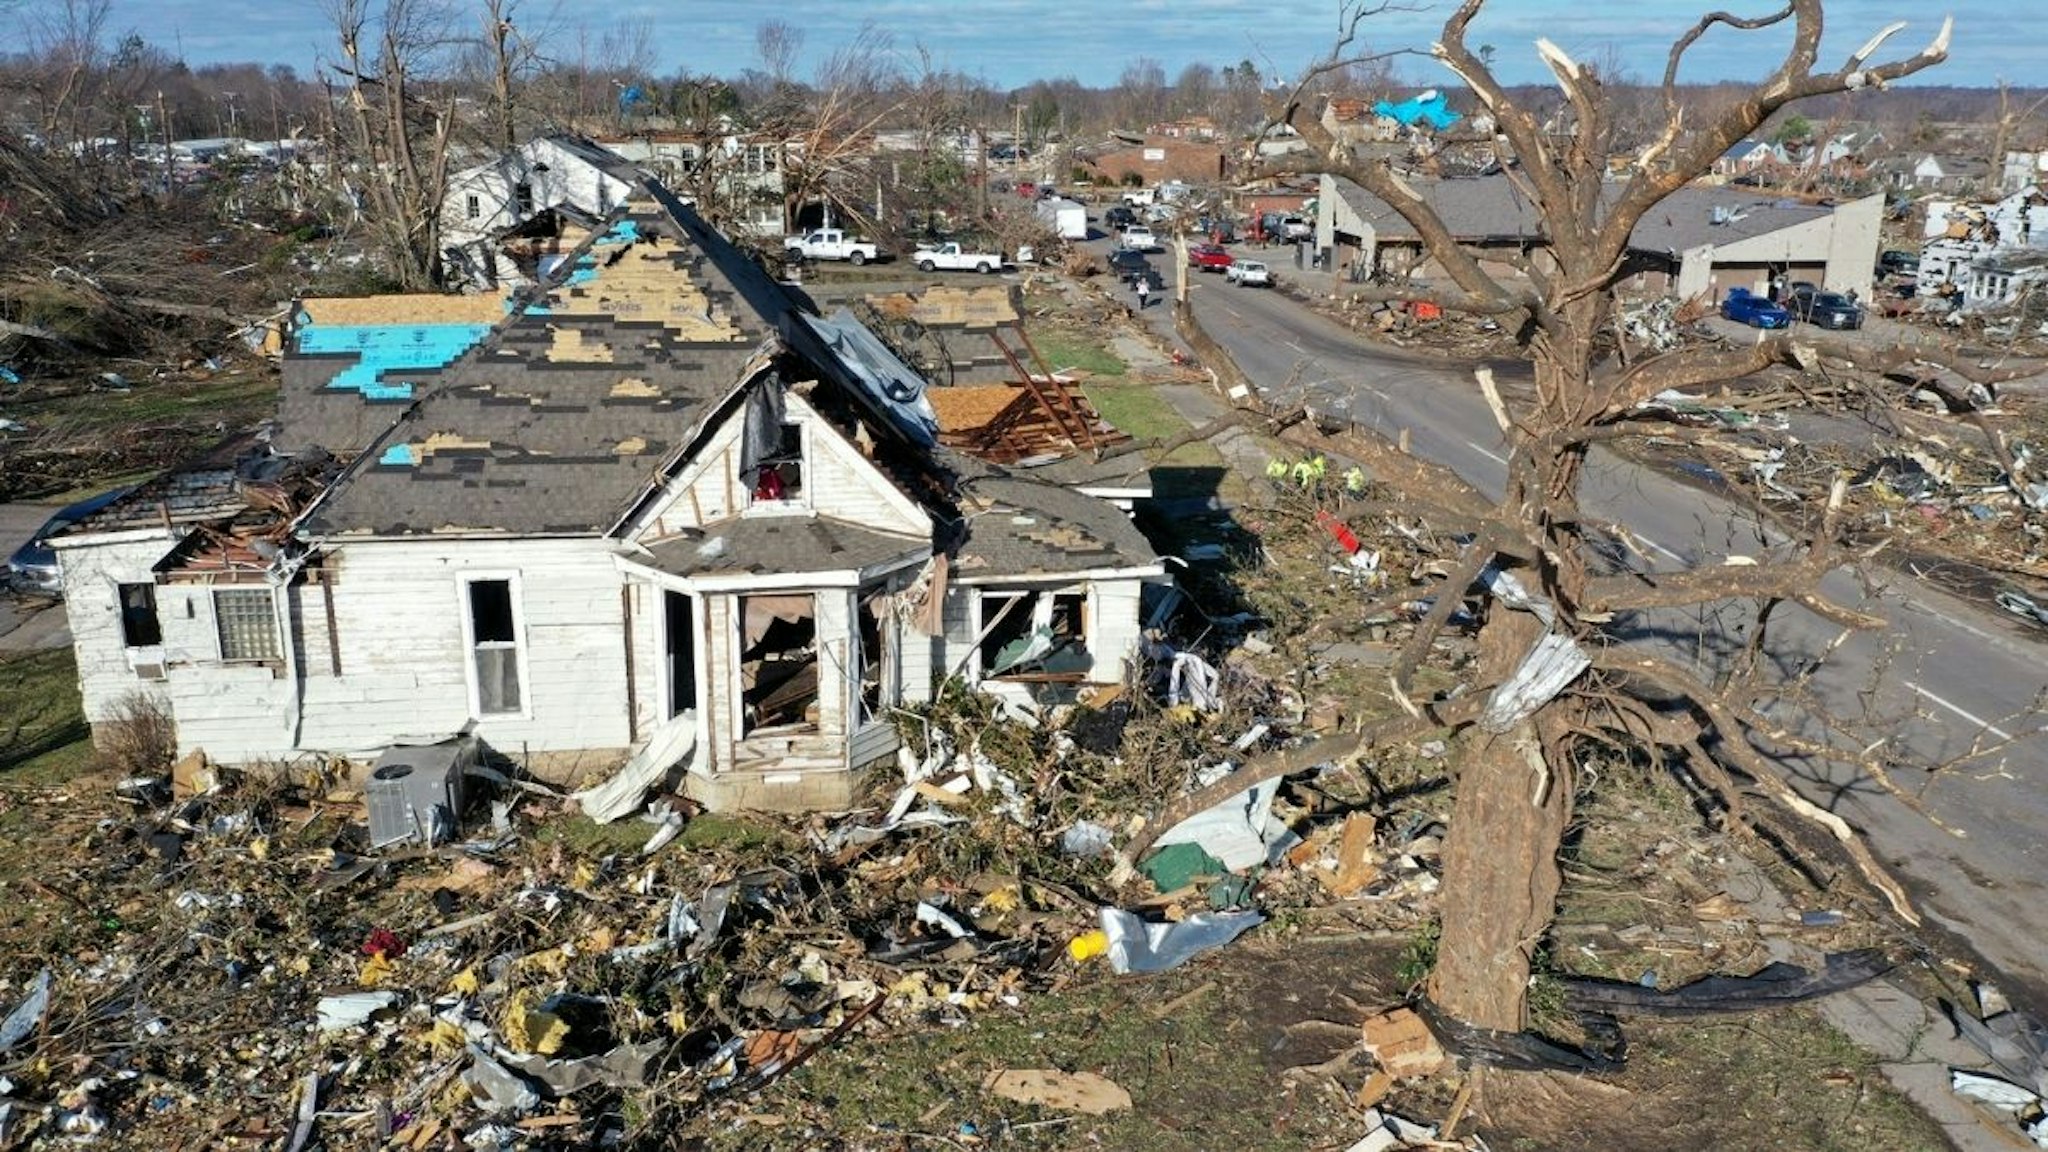 In this aerial view, homes are badly destroyed after a tornado ripped through area the previous evening on December 11, 2021 in Mayfield, Kentucky.